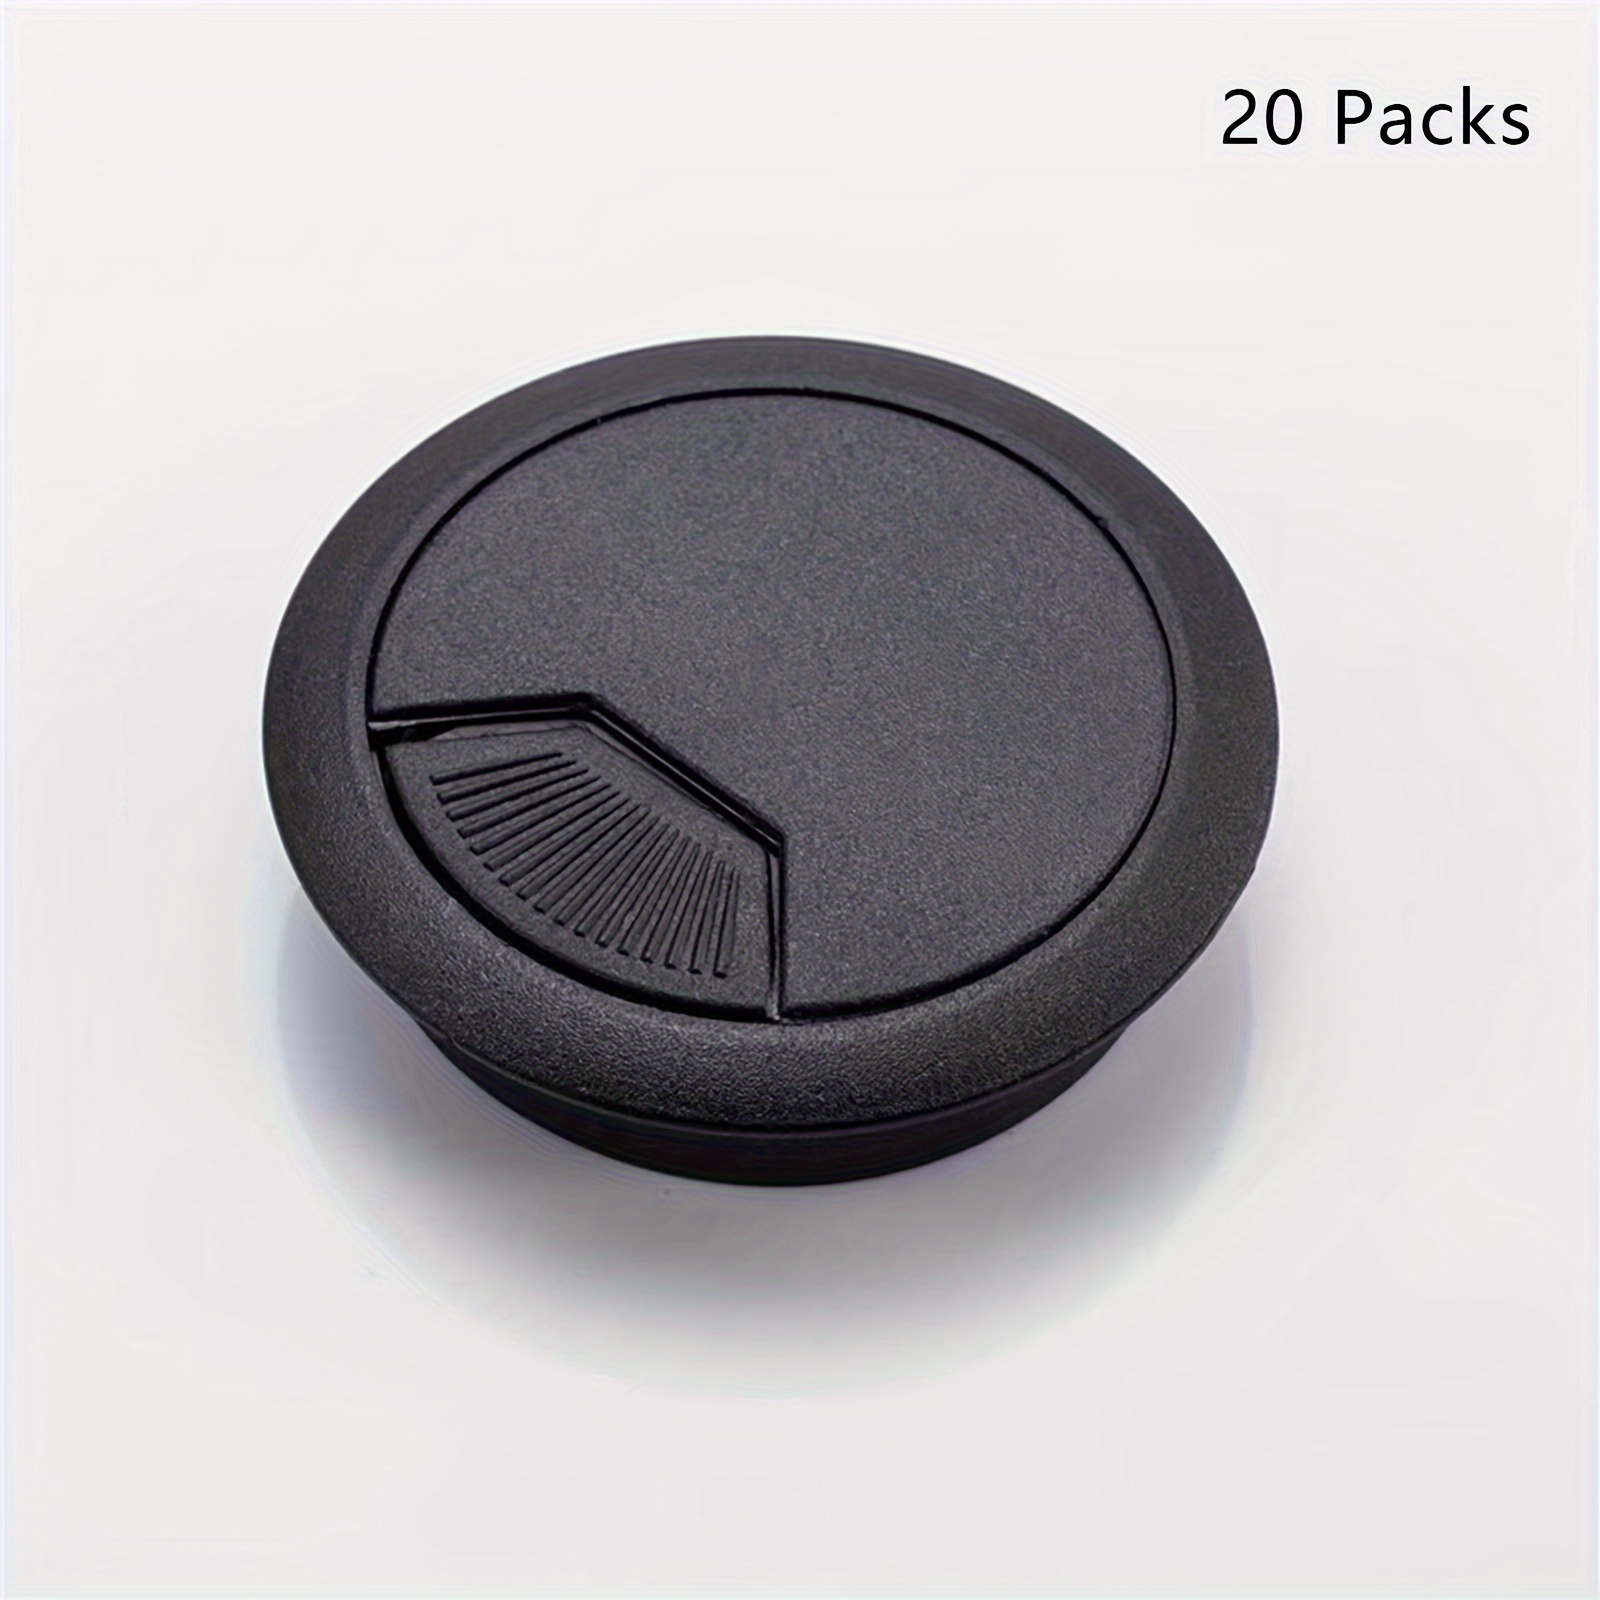 MAHDPRO Desk Grommet 2 inch (50 mm) Pack of 5-Black ABS Plastic Cable Hole Cover to Arrange Wires & Cords Through Computer Table/Countertops